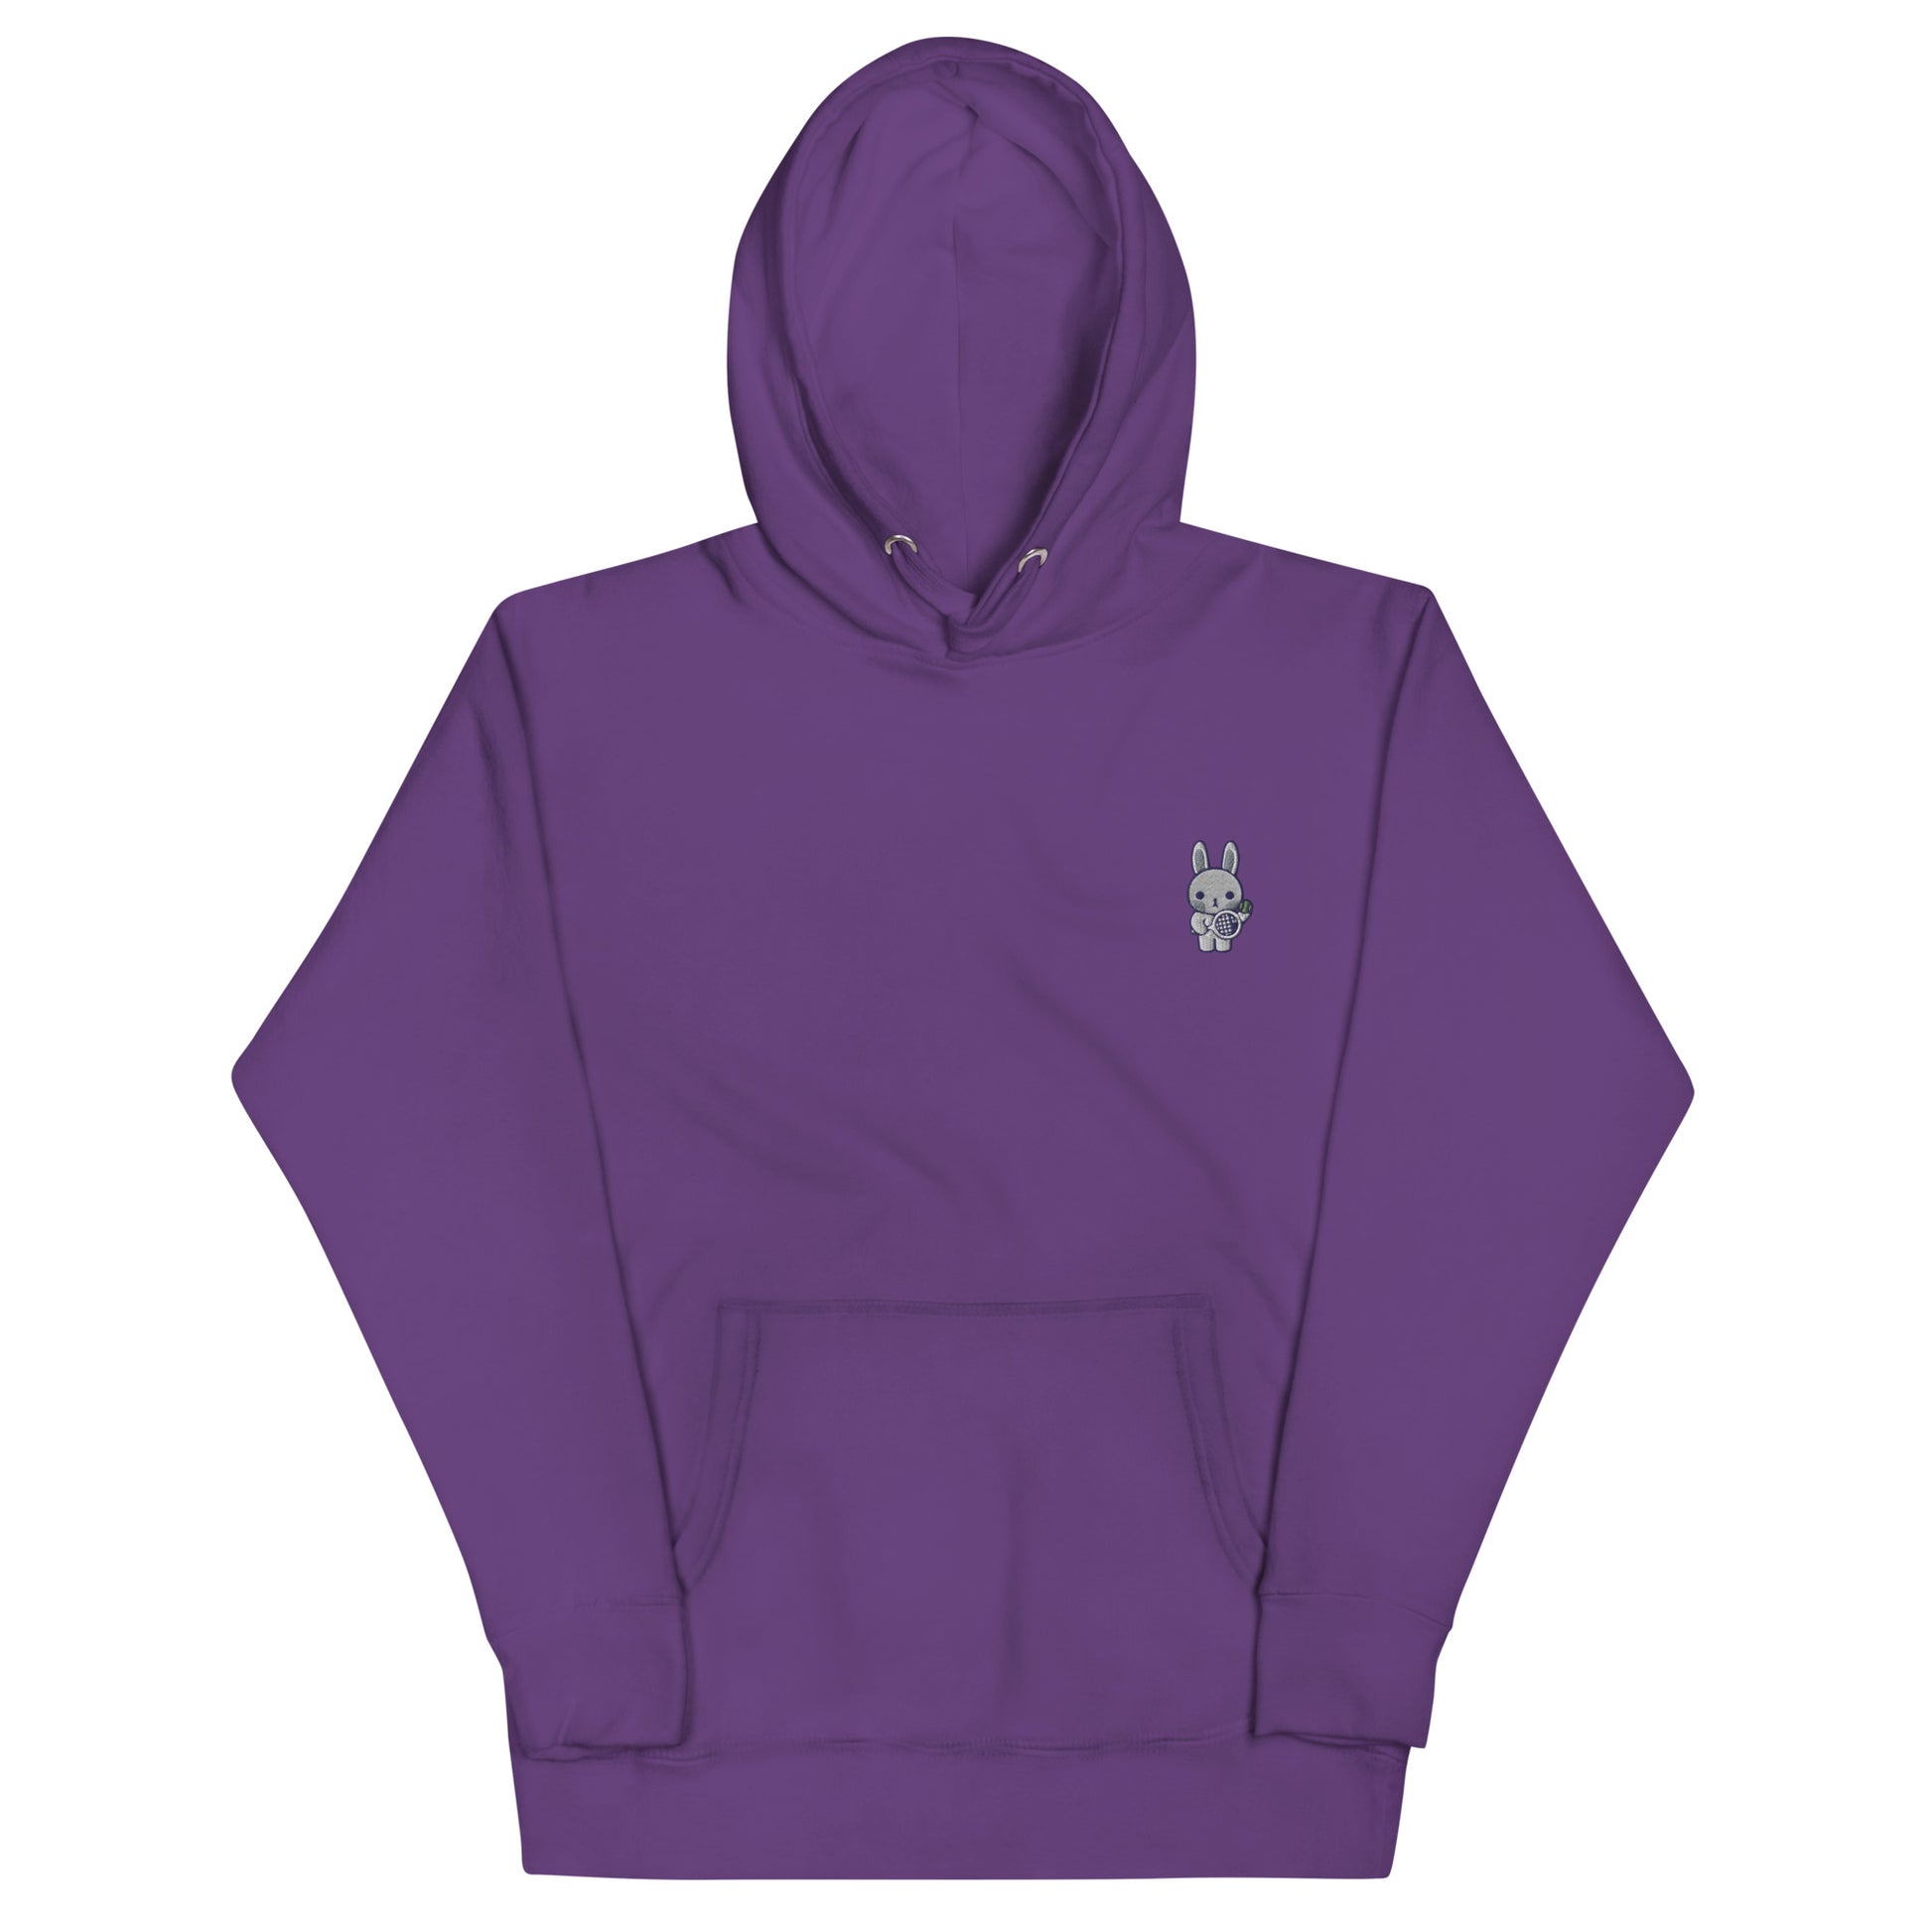 ADULT UNISEX EMMA HOODIE - EMBROIDERED LOGO - AVAILABLE IN 10 COLORS - TOKKITENNIS